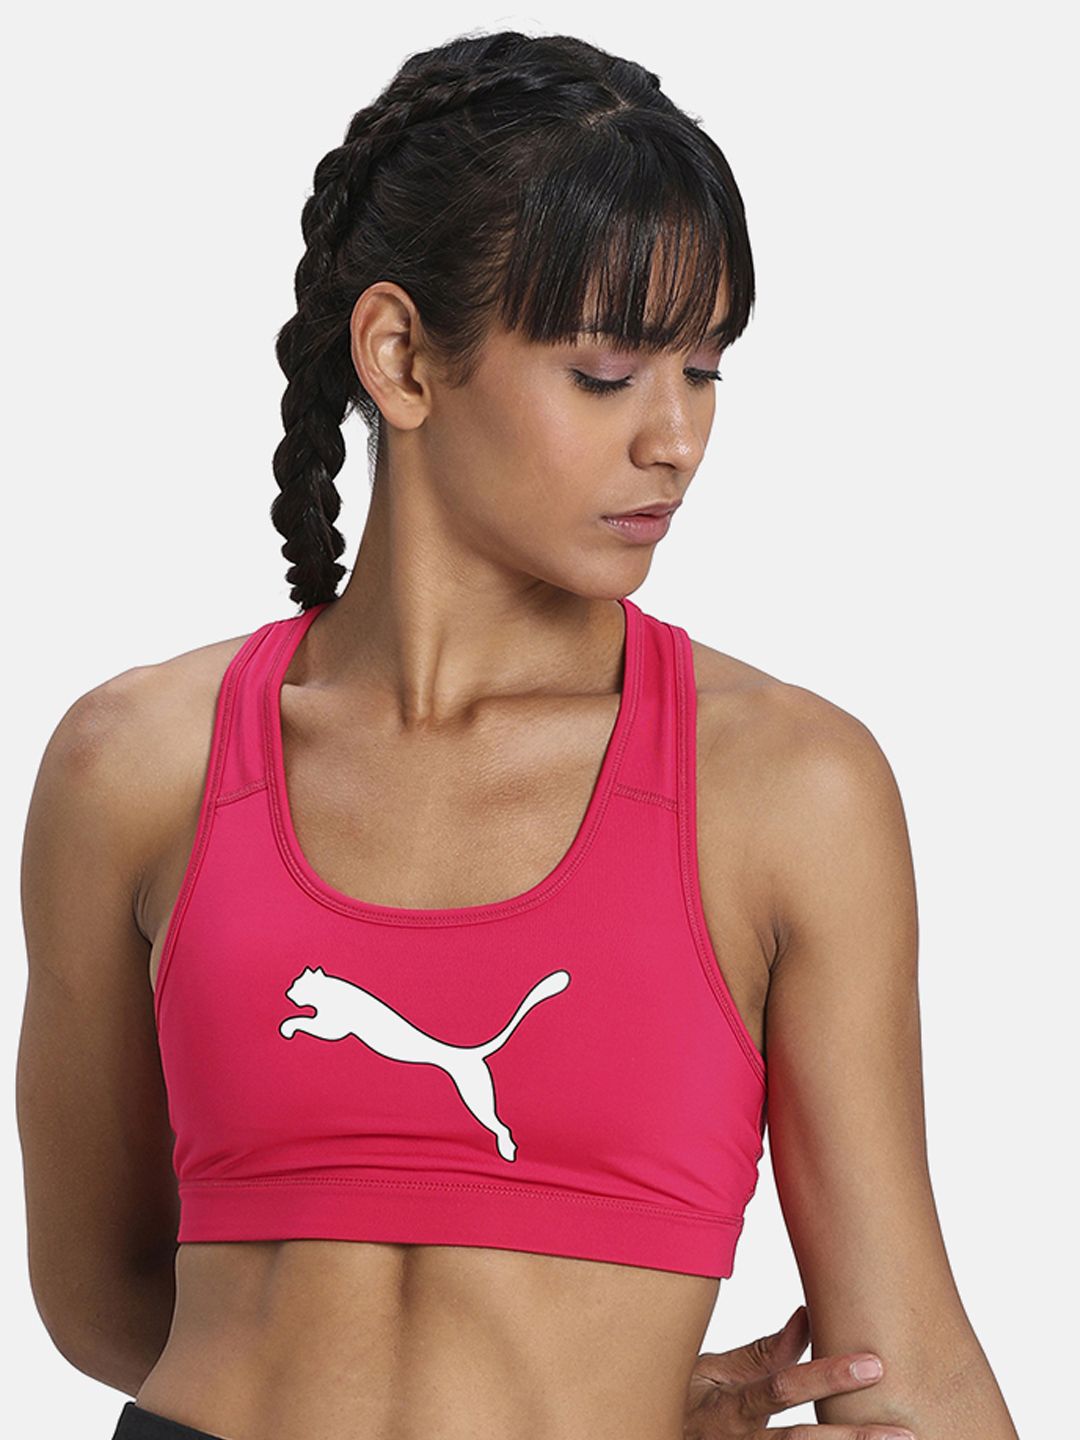 Puma Pink Printed Non-Wired Lightly Padded Sports 4Keeps Graphic Bra PM 51891207 Price in India